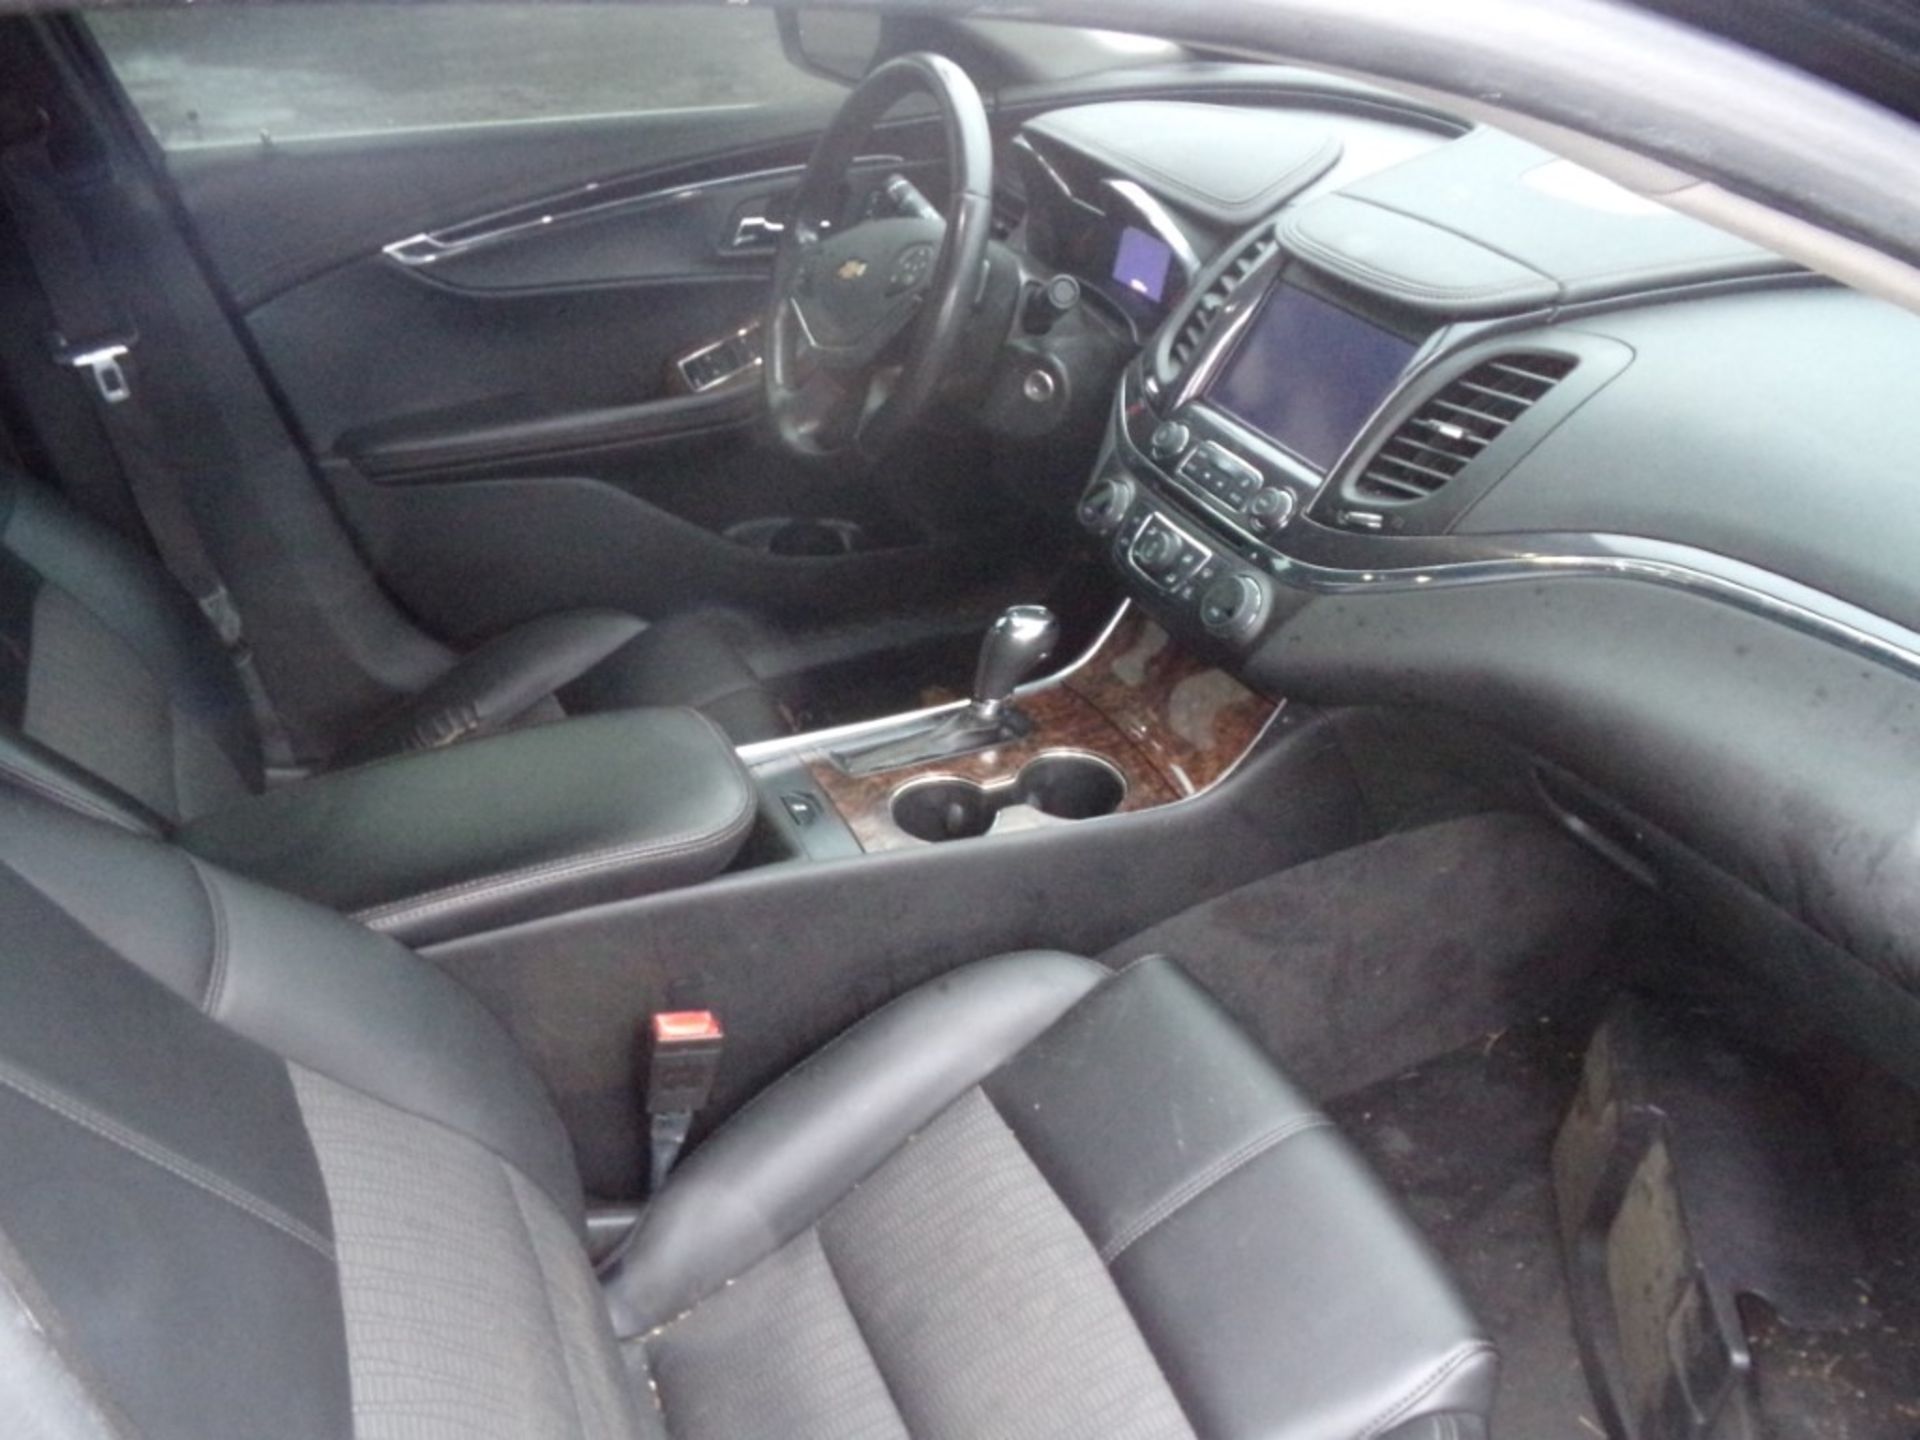 2014 Chevrolet Impala LT, Leather, Windows Are Tinted, Includig Front Windshield, Black, 133,313 - Image 5 of 6